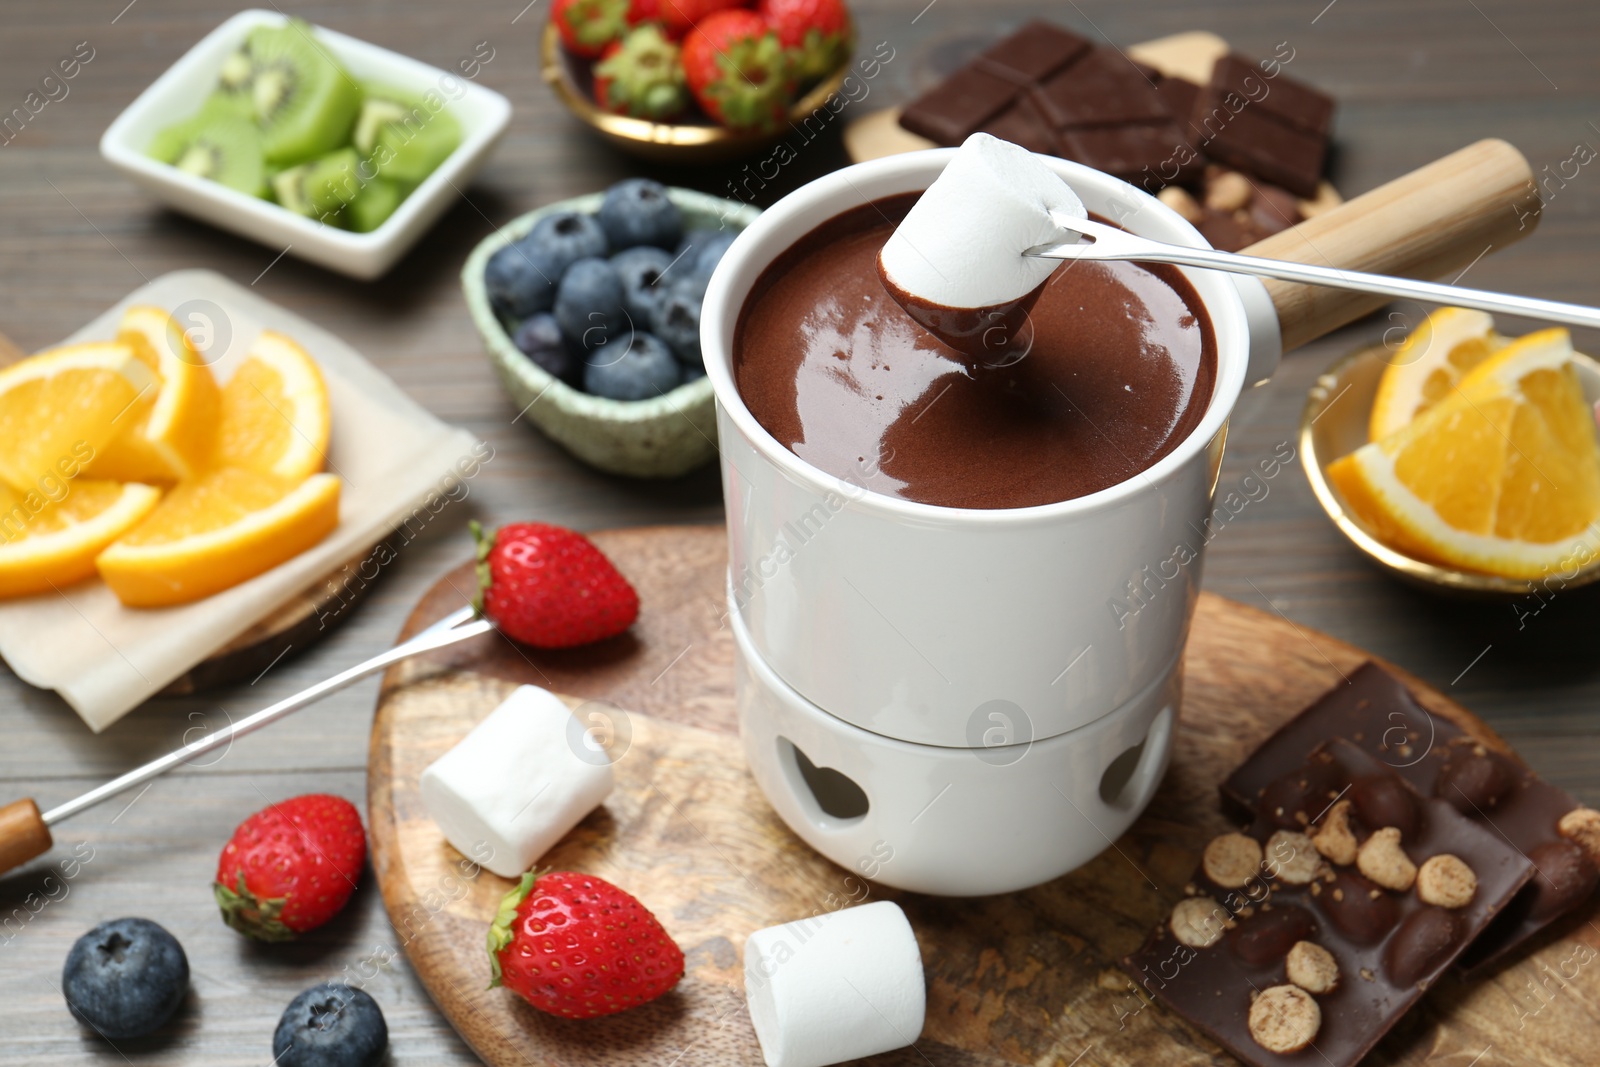 Photo of Dipping sweet marshmallow in fondue pot with melted chocolate at wooden table